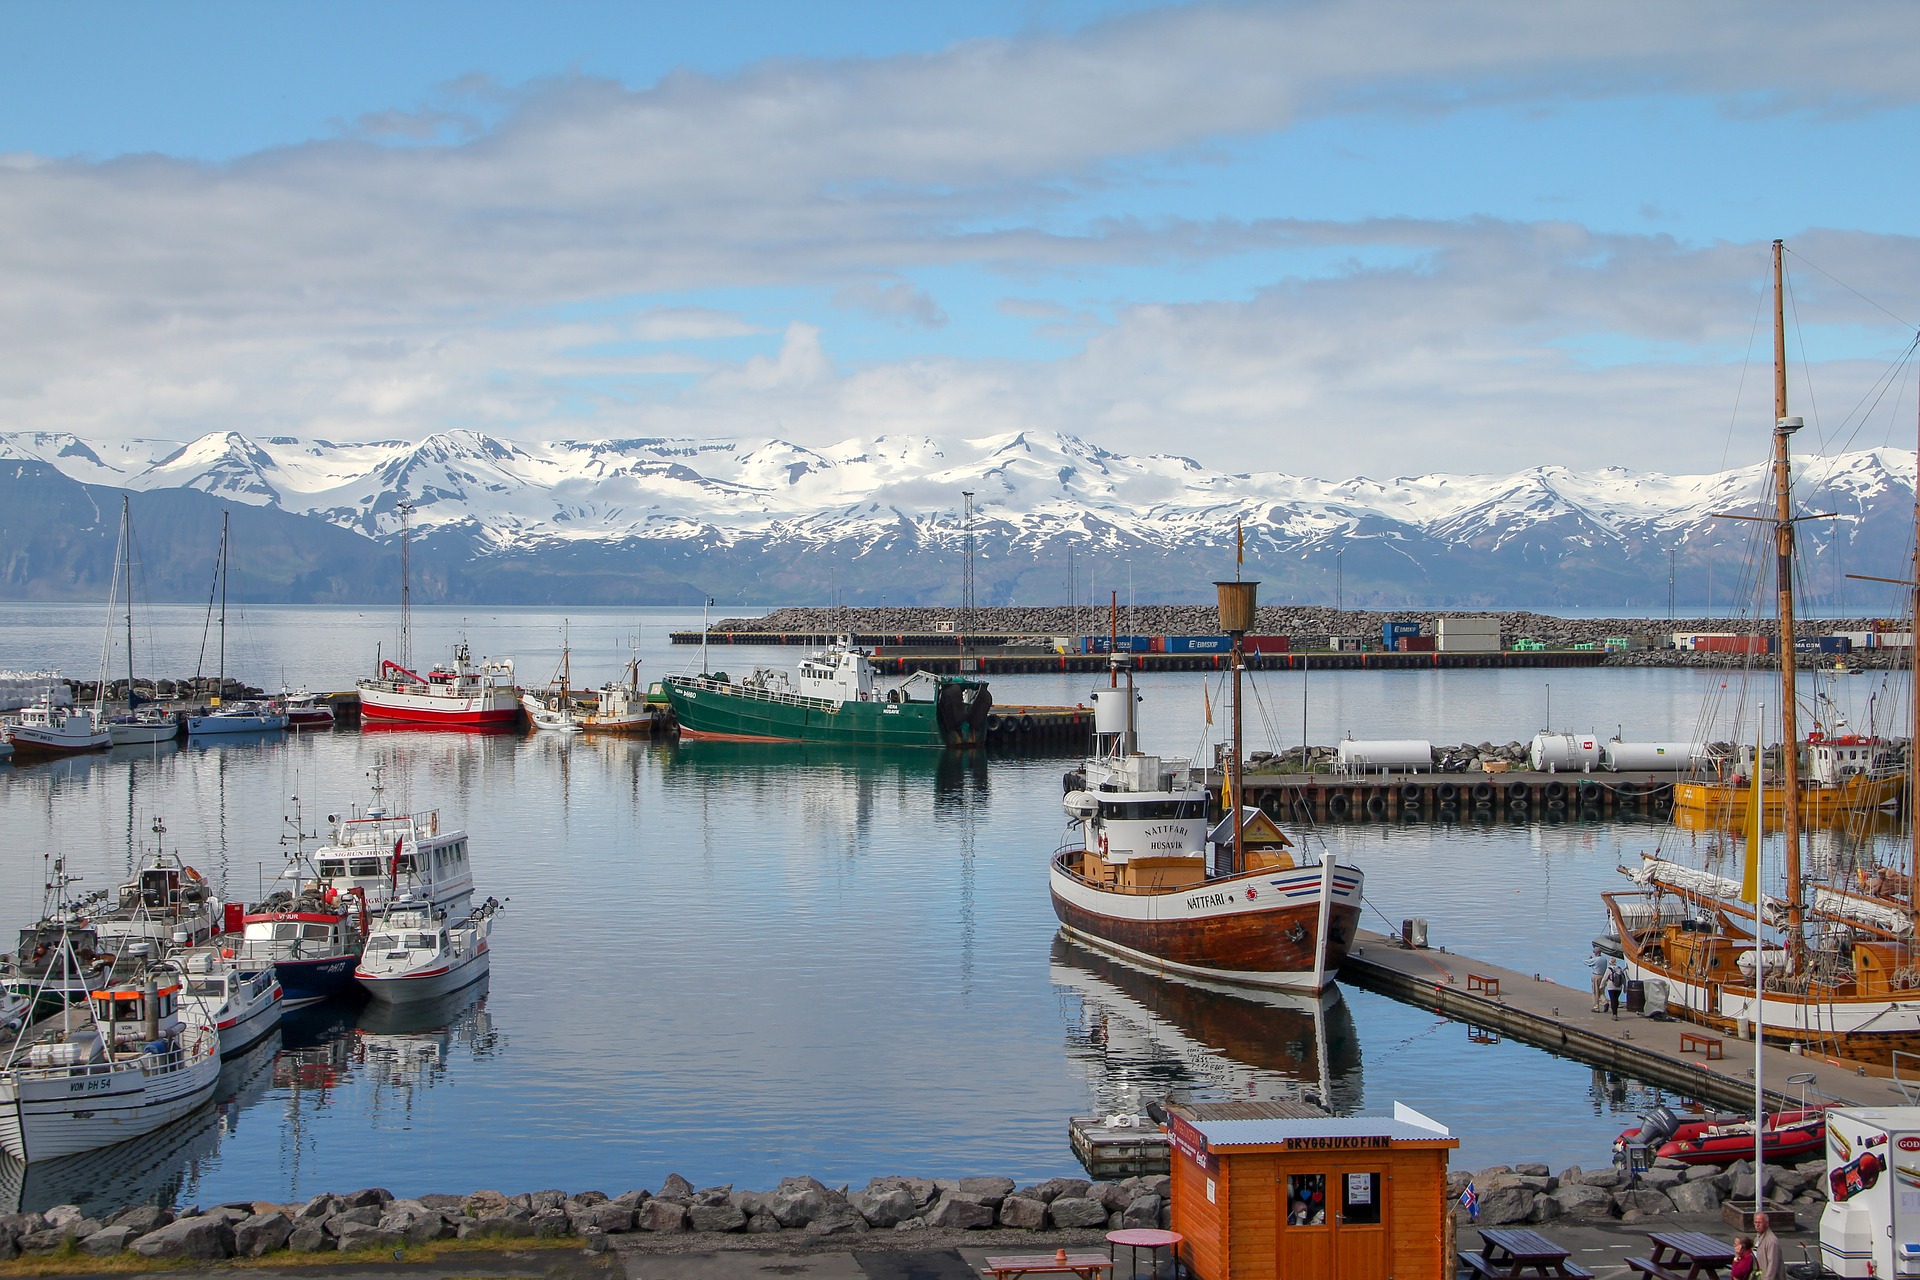 fishing harbor of Husavik with boats, docks, sea, mountains on the background